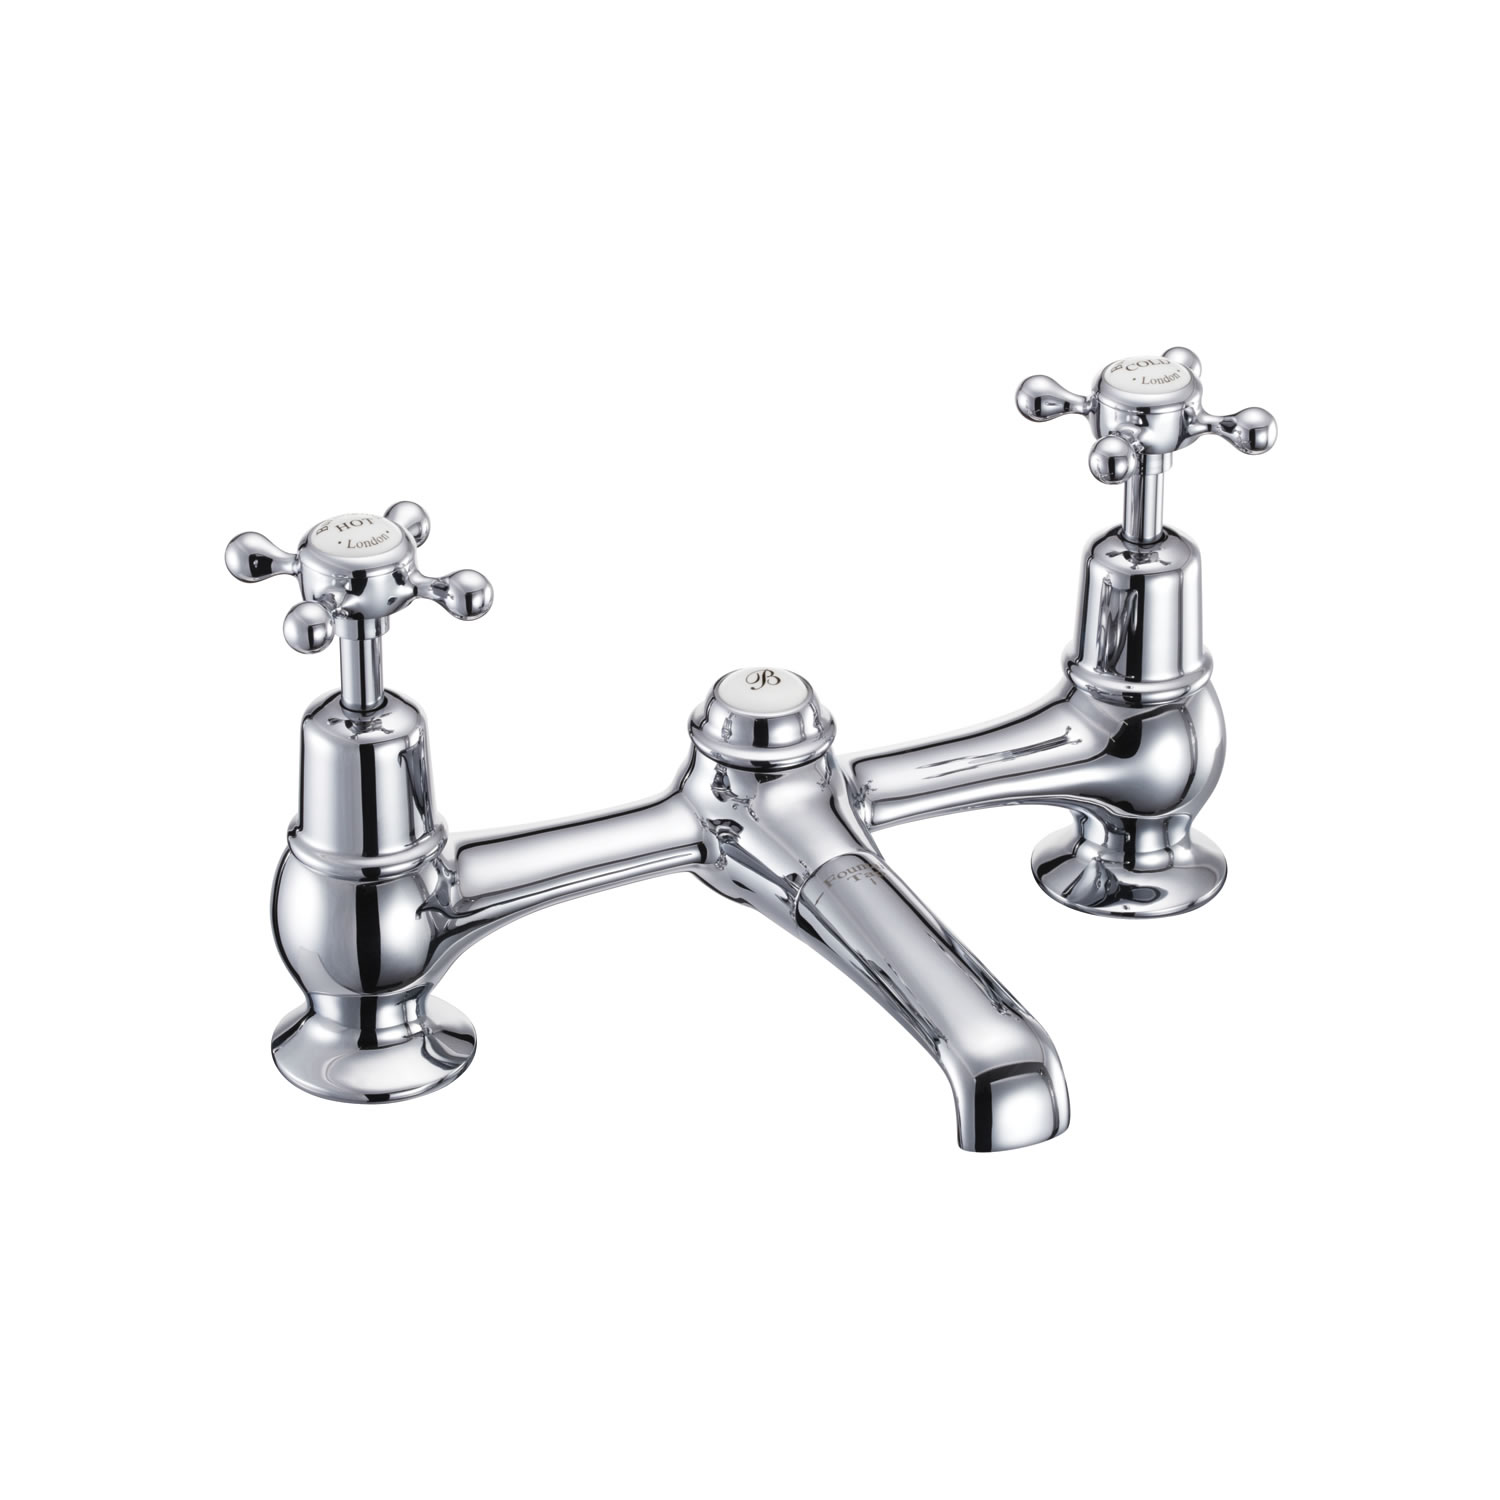 Claremont 2 tap hole bridge basin mixer with low central indice with plug and chain waste with swivel spout